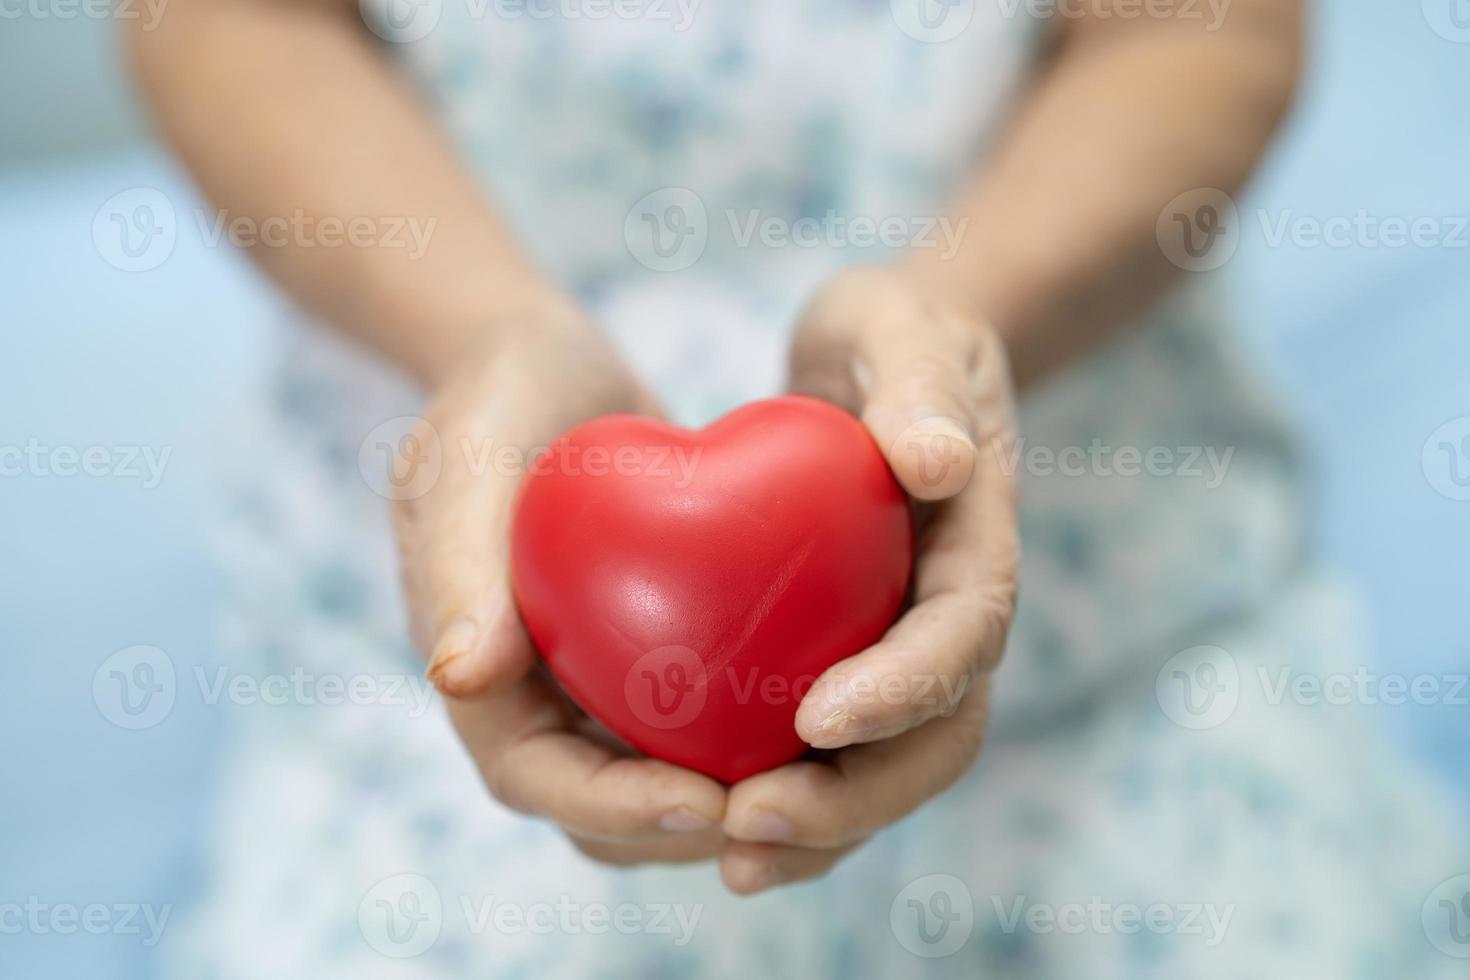 Asian senior or elderly old lady woman patient holding red heart in her hand on bed in nursing hospital ward, healthy strong medical concept photo